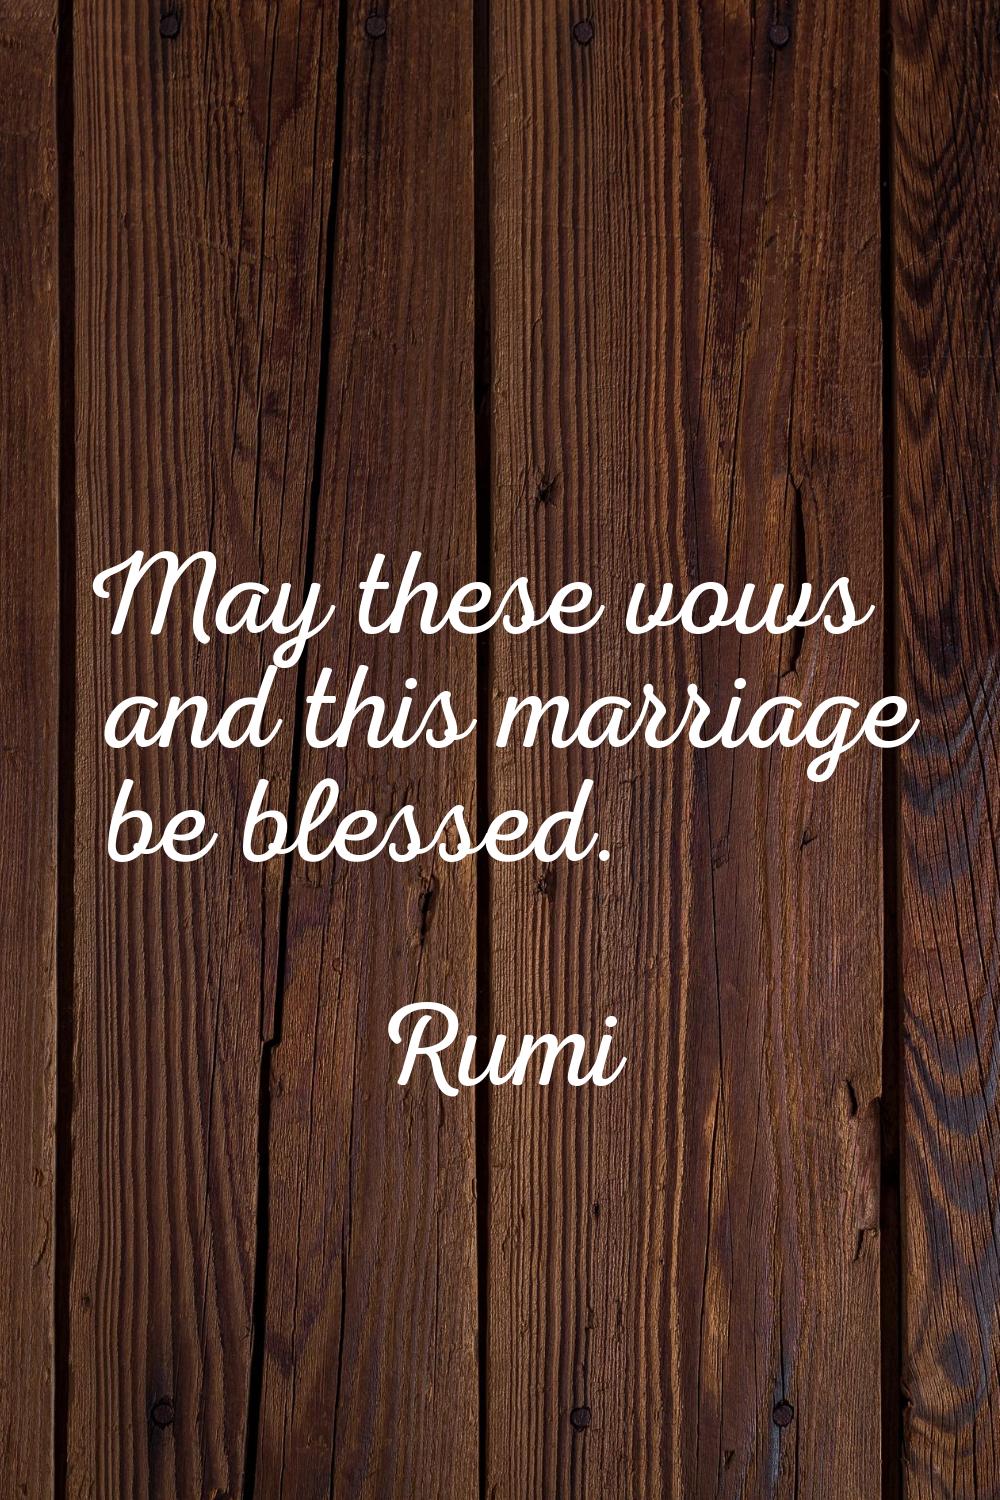 May these vows and this marriage be blessed.